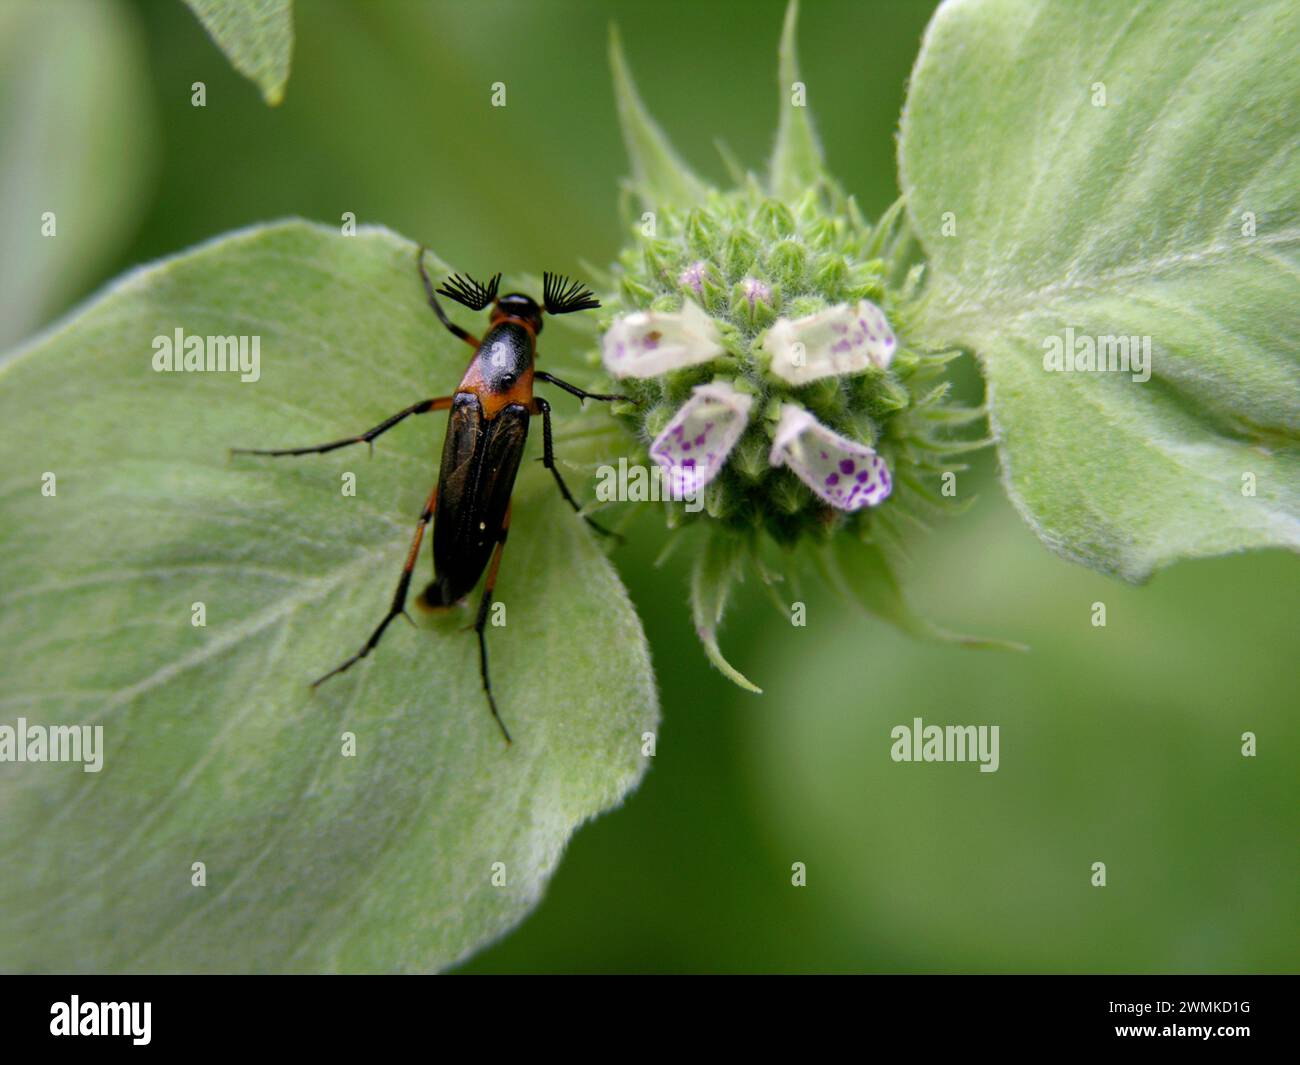 Wedge-shaped male beetle sits on a flower; North Carolina, United States of America Stock Photo